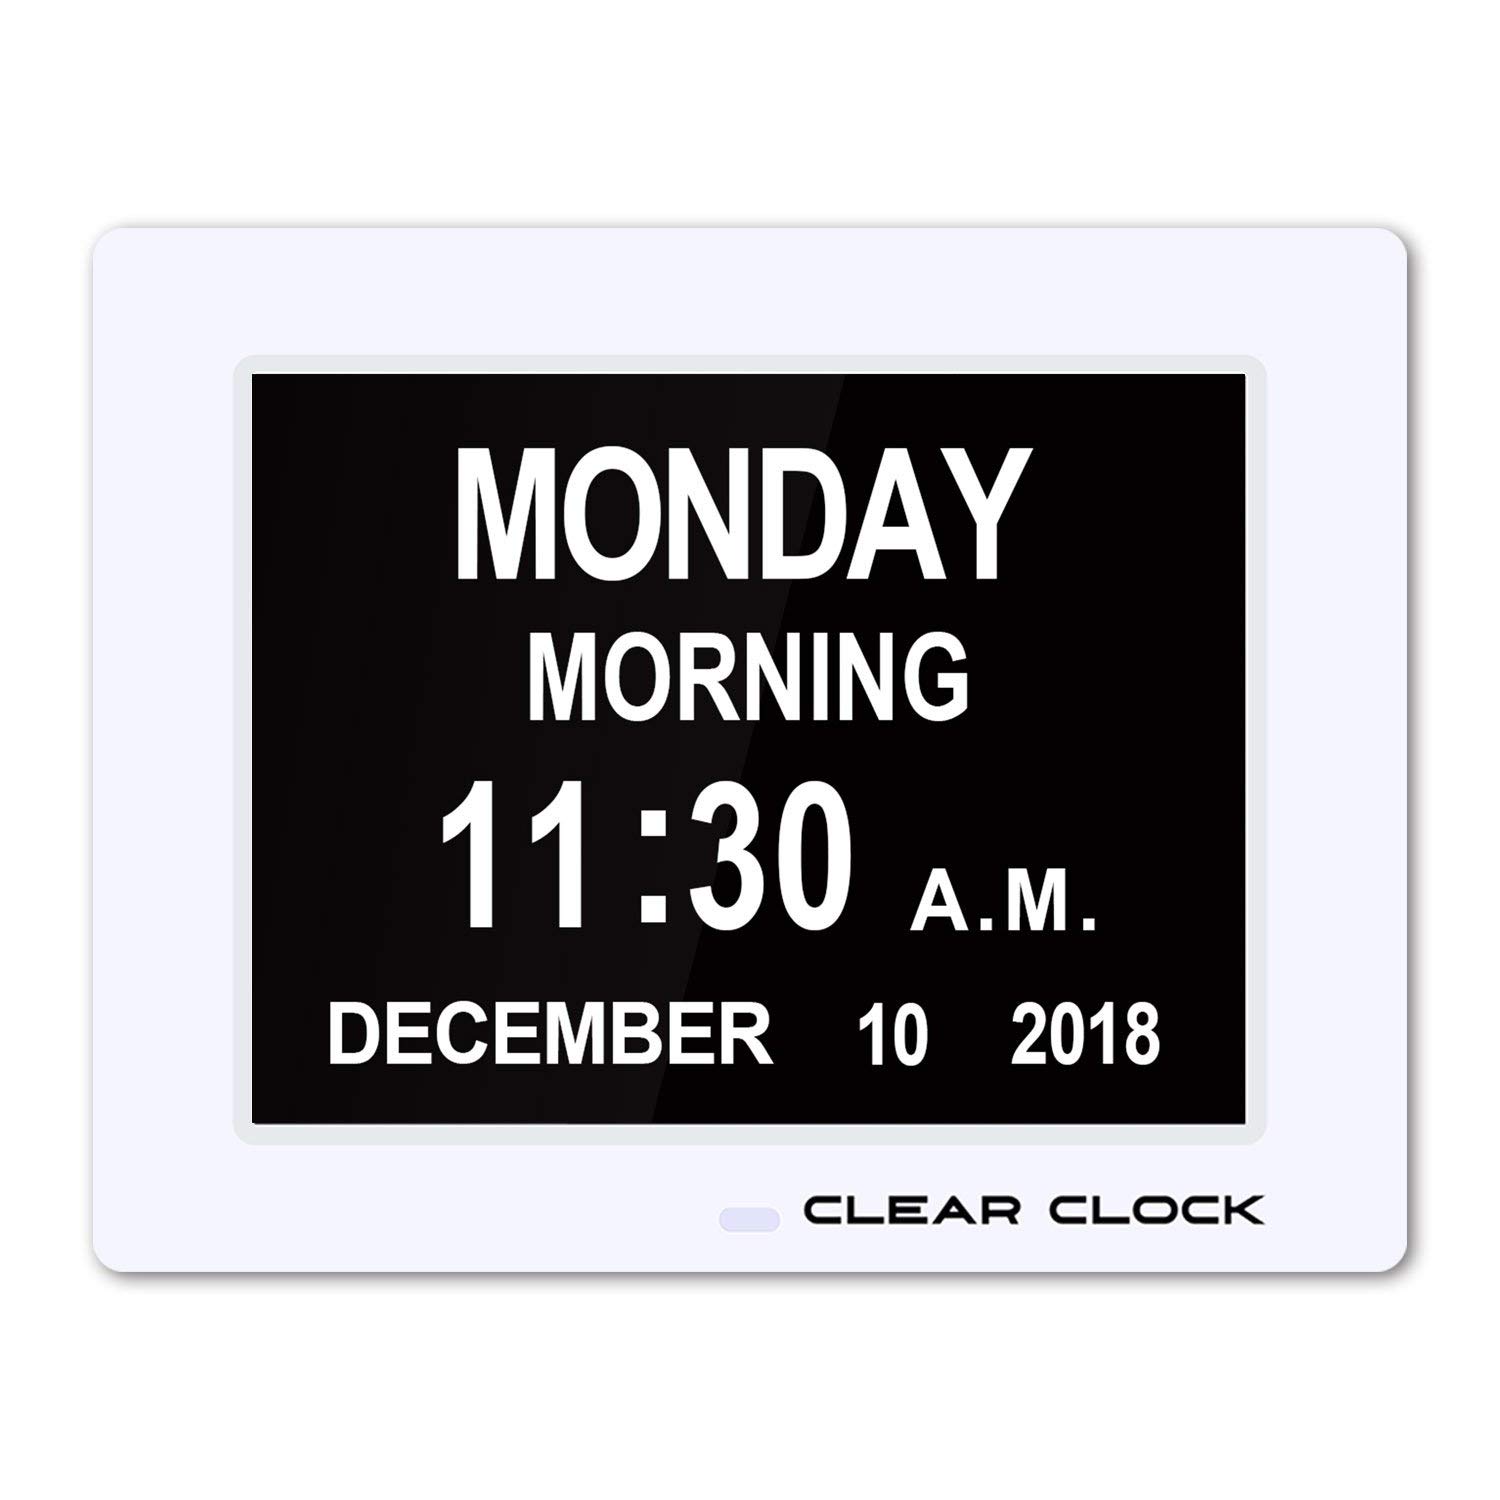 Clear Clock [Newest Version] Extra Large Digital Memory Loss Calendar Day Clock With Optional Day Cycle + Alarm Perfect For Seniors + Impaired Vision Dementia Clock White